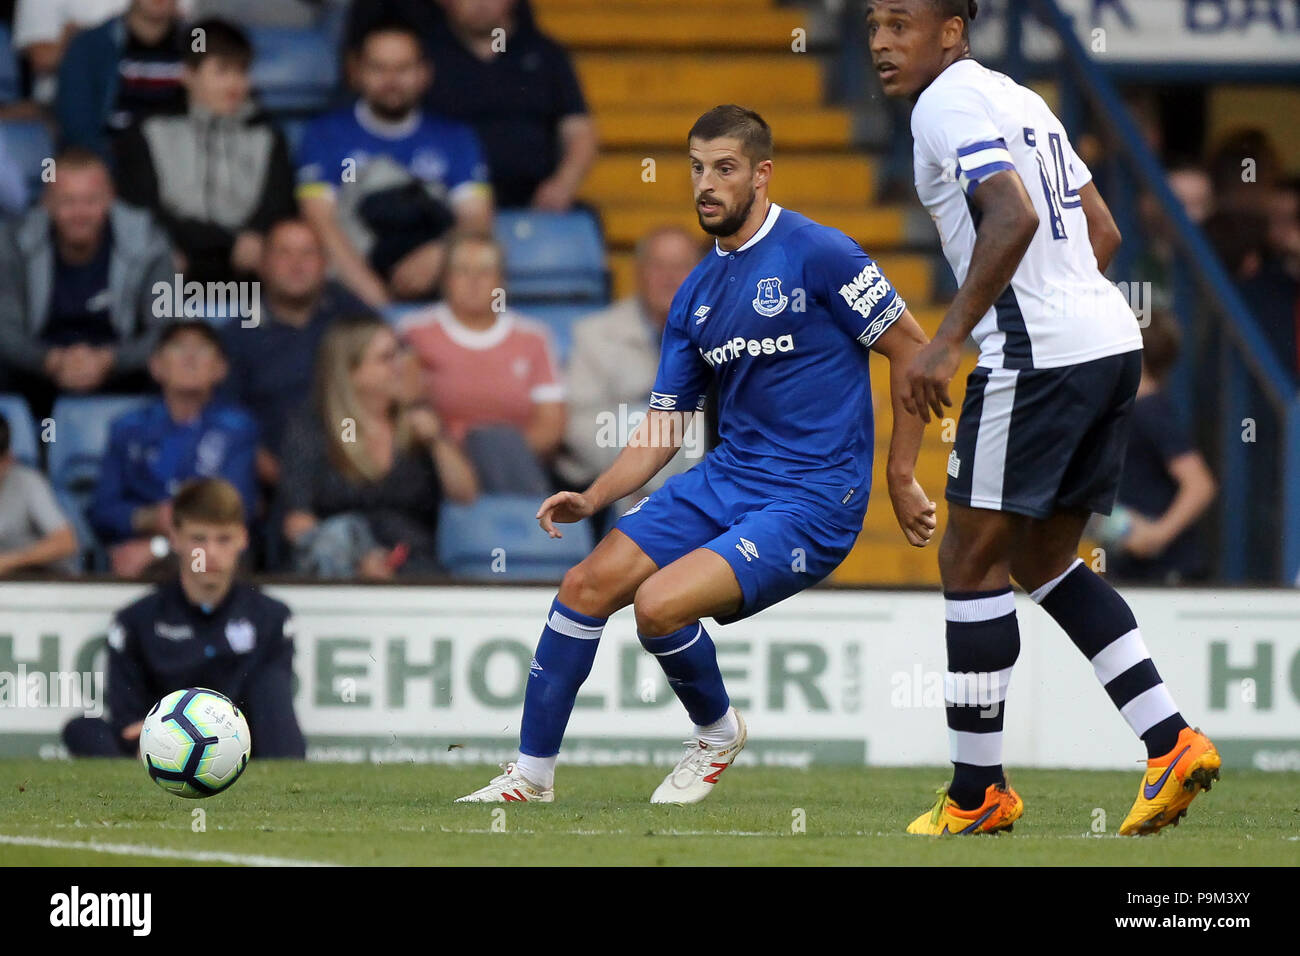 Bury, Lancashire, UK. 18th July, 2018. Kevin Mirallas of Everton during the Pre-Season Friendly match between Bury and Everton at Gigg Lane on July 18th 2018 in Bury, England. Credit: PHC Images/Alamy Live News Stock Photo